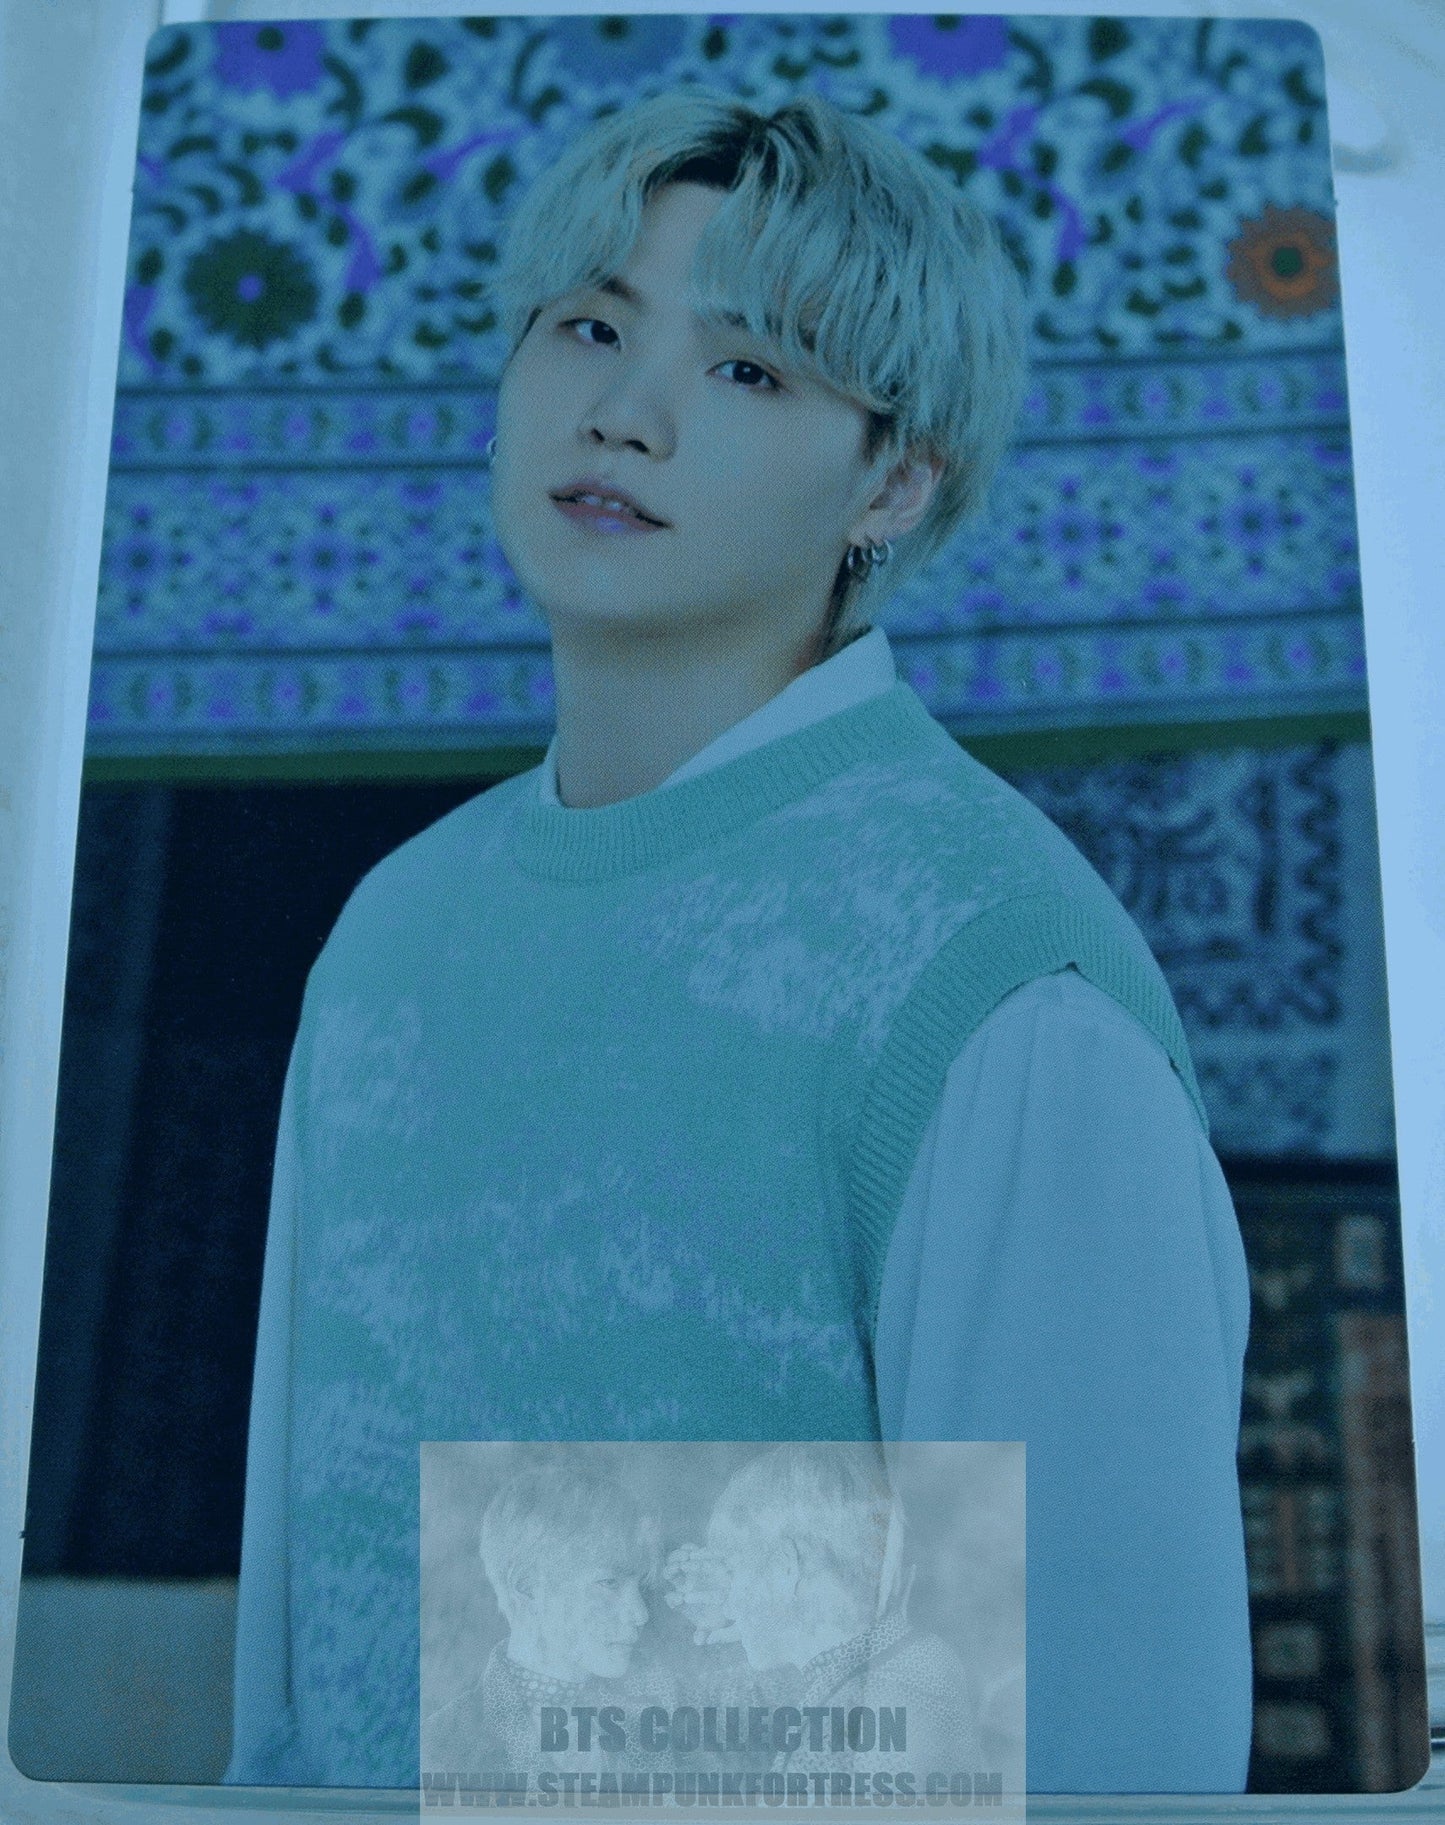 BTS SUGA MIN YOONGI YOON-GI PTD 2022 PERMISSION TO DANCE ON STAGE SEOUL #3 OF 4 PHOTOCARD PHOTO CARD NEW OFFICIAL MERCHANDISE